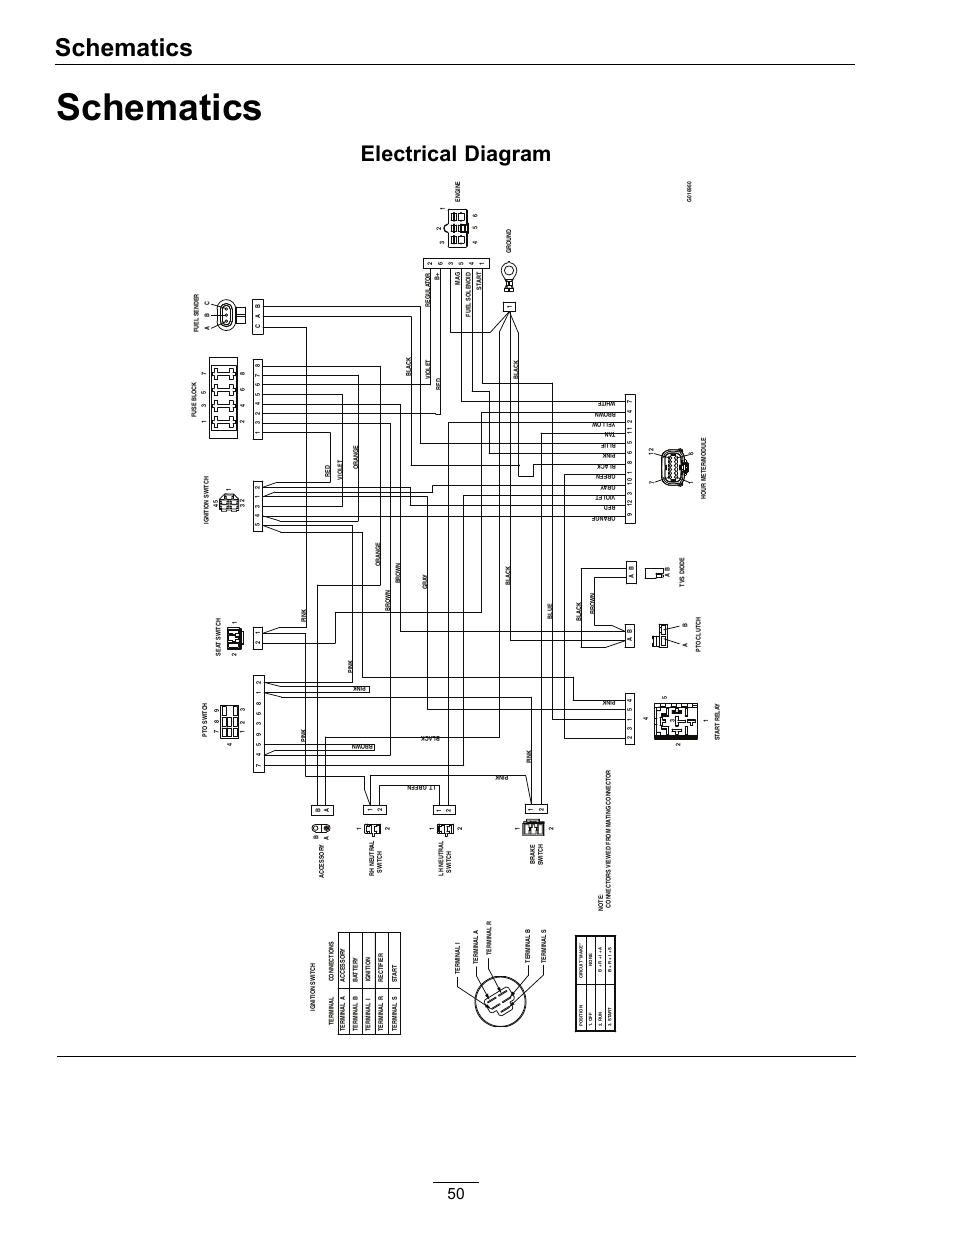 wiring diagram for crank position sensor on 95 chevy s10 w/ 4.3 z engine